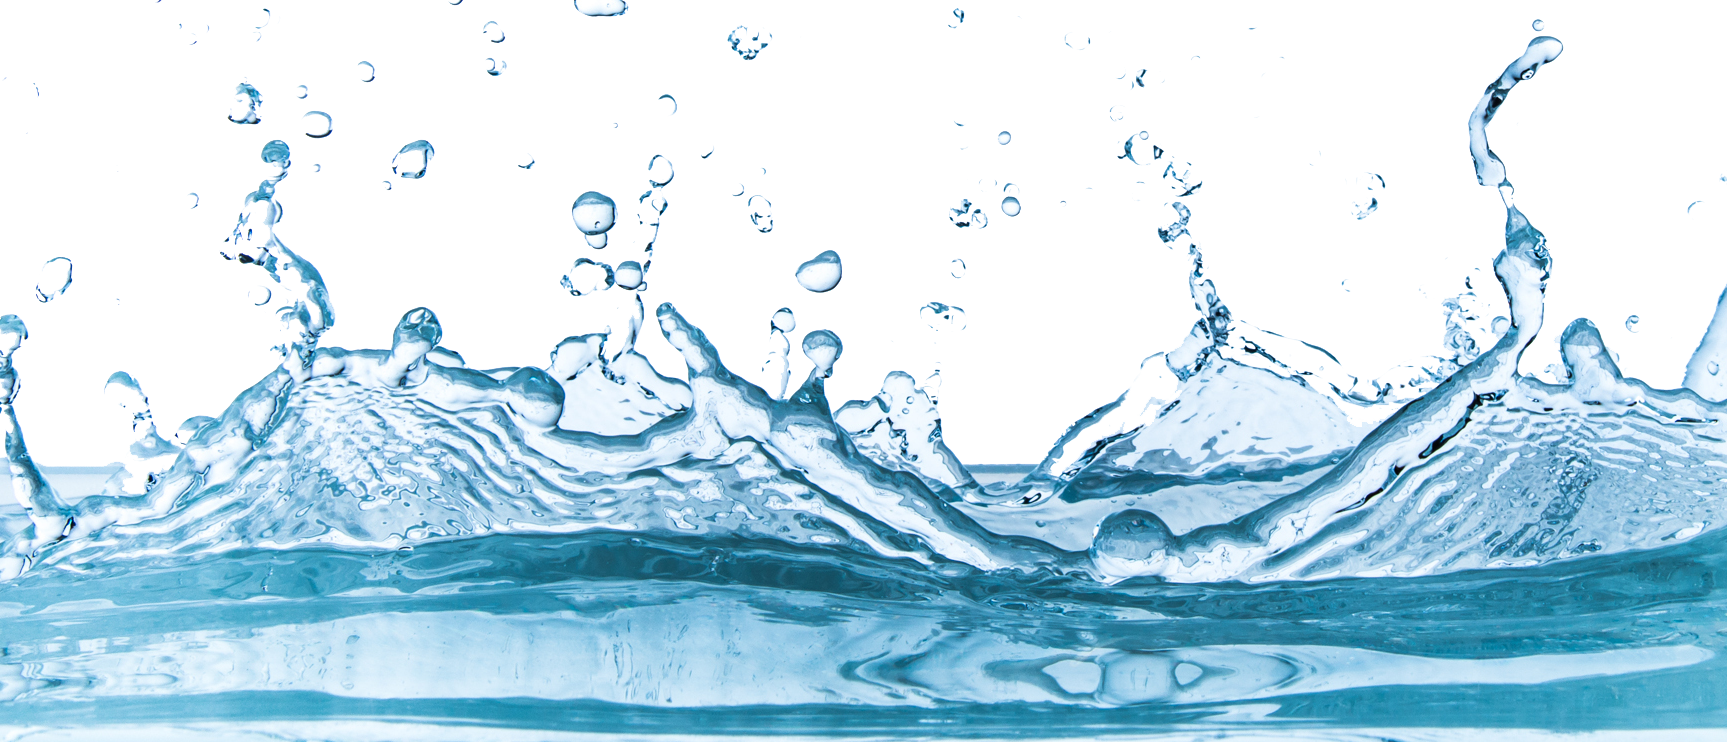 Water PNG image, free water drops PNG images download.